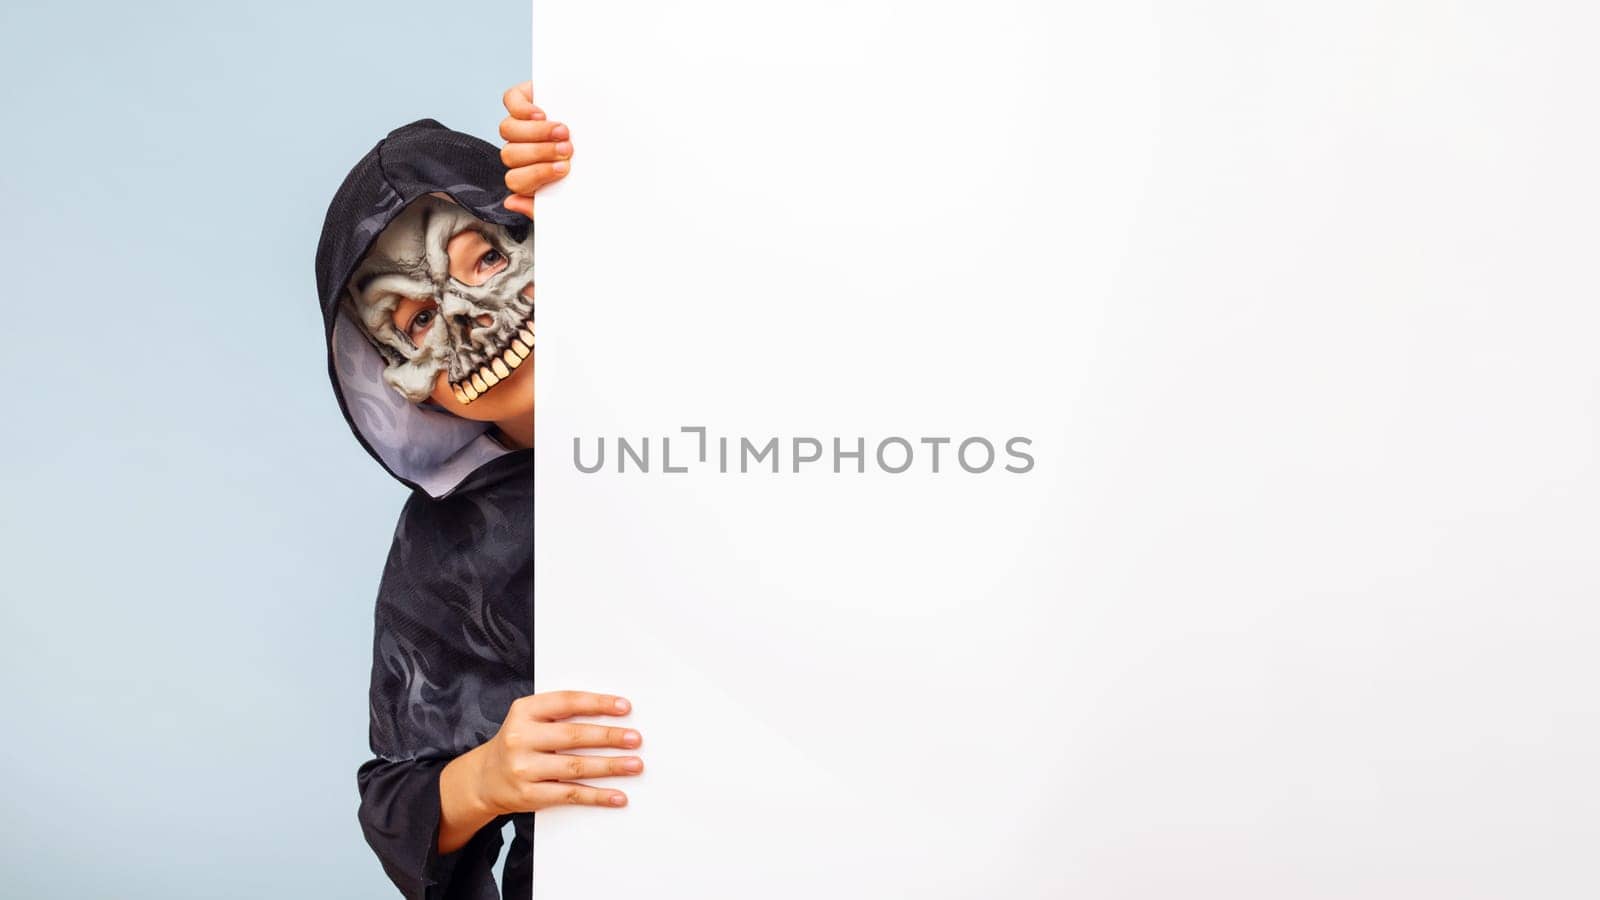 Happy Halloween. Cute little boy in a costume hiding behind white banner blank. Happy kid holding cardboard background with copy space.